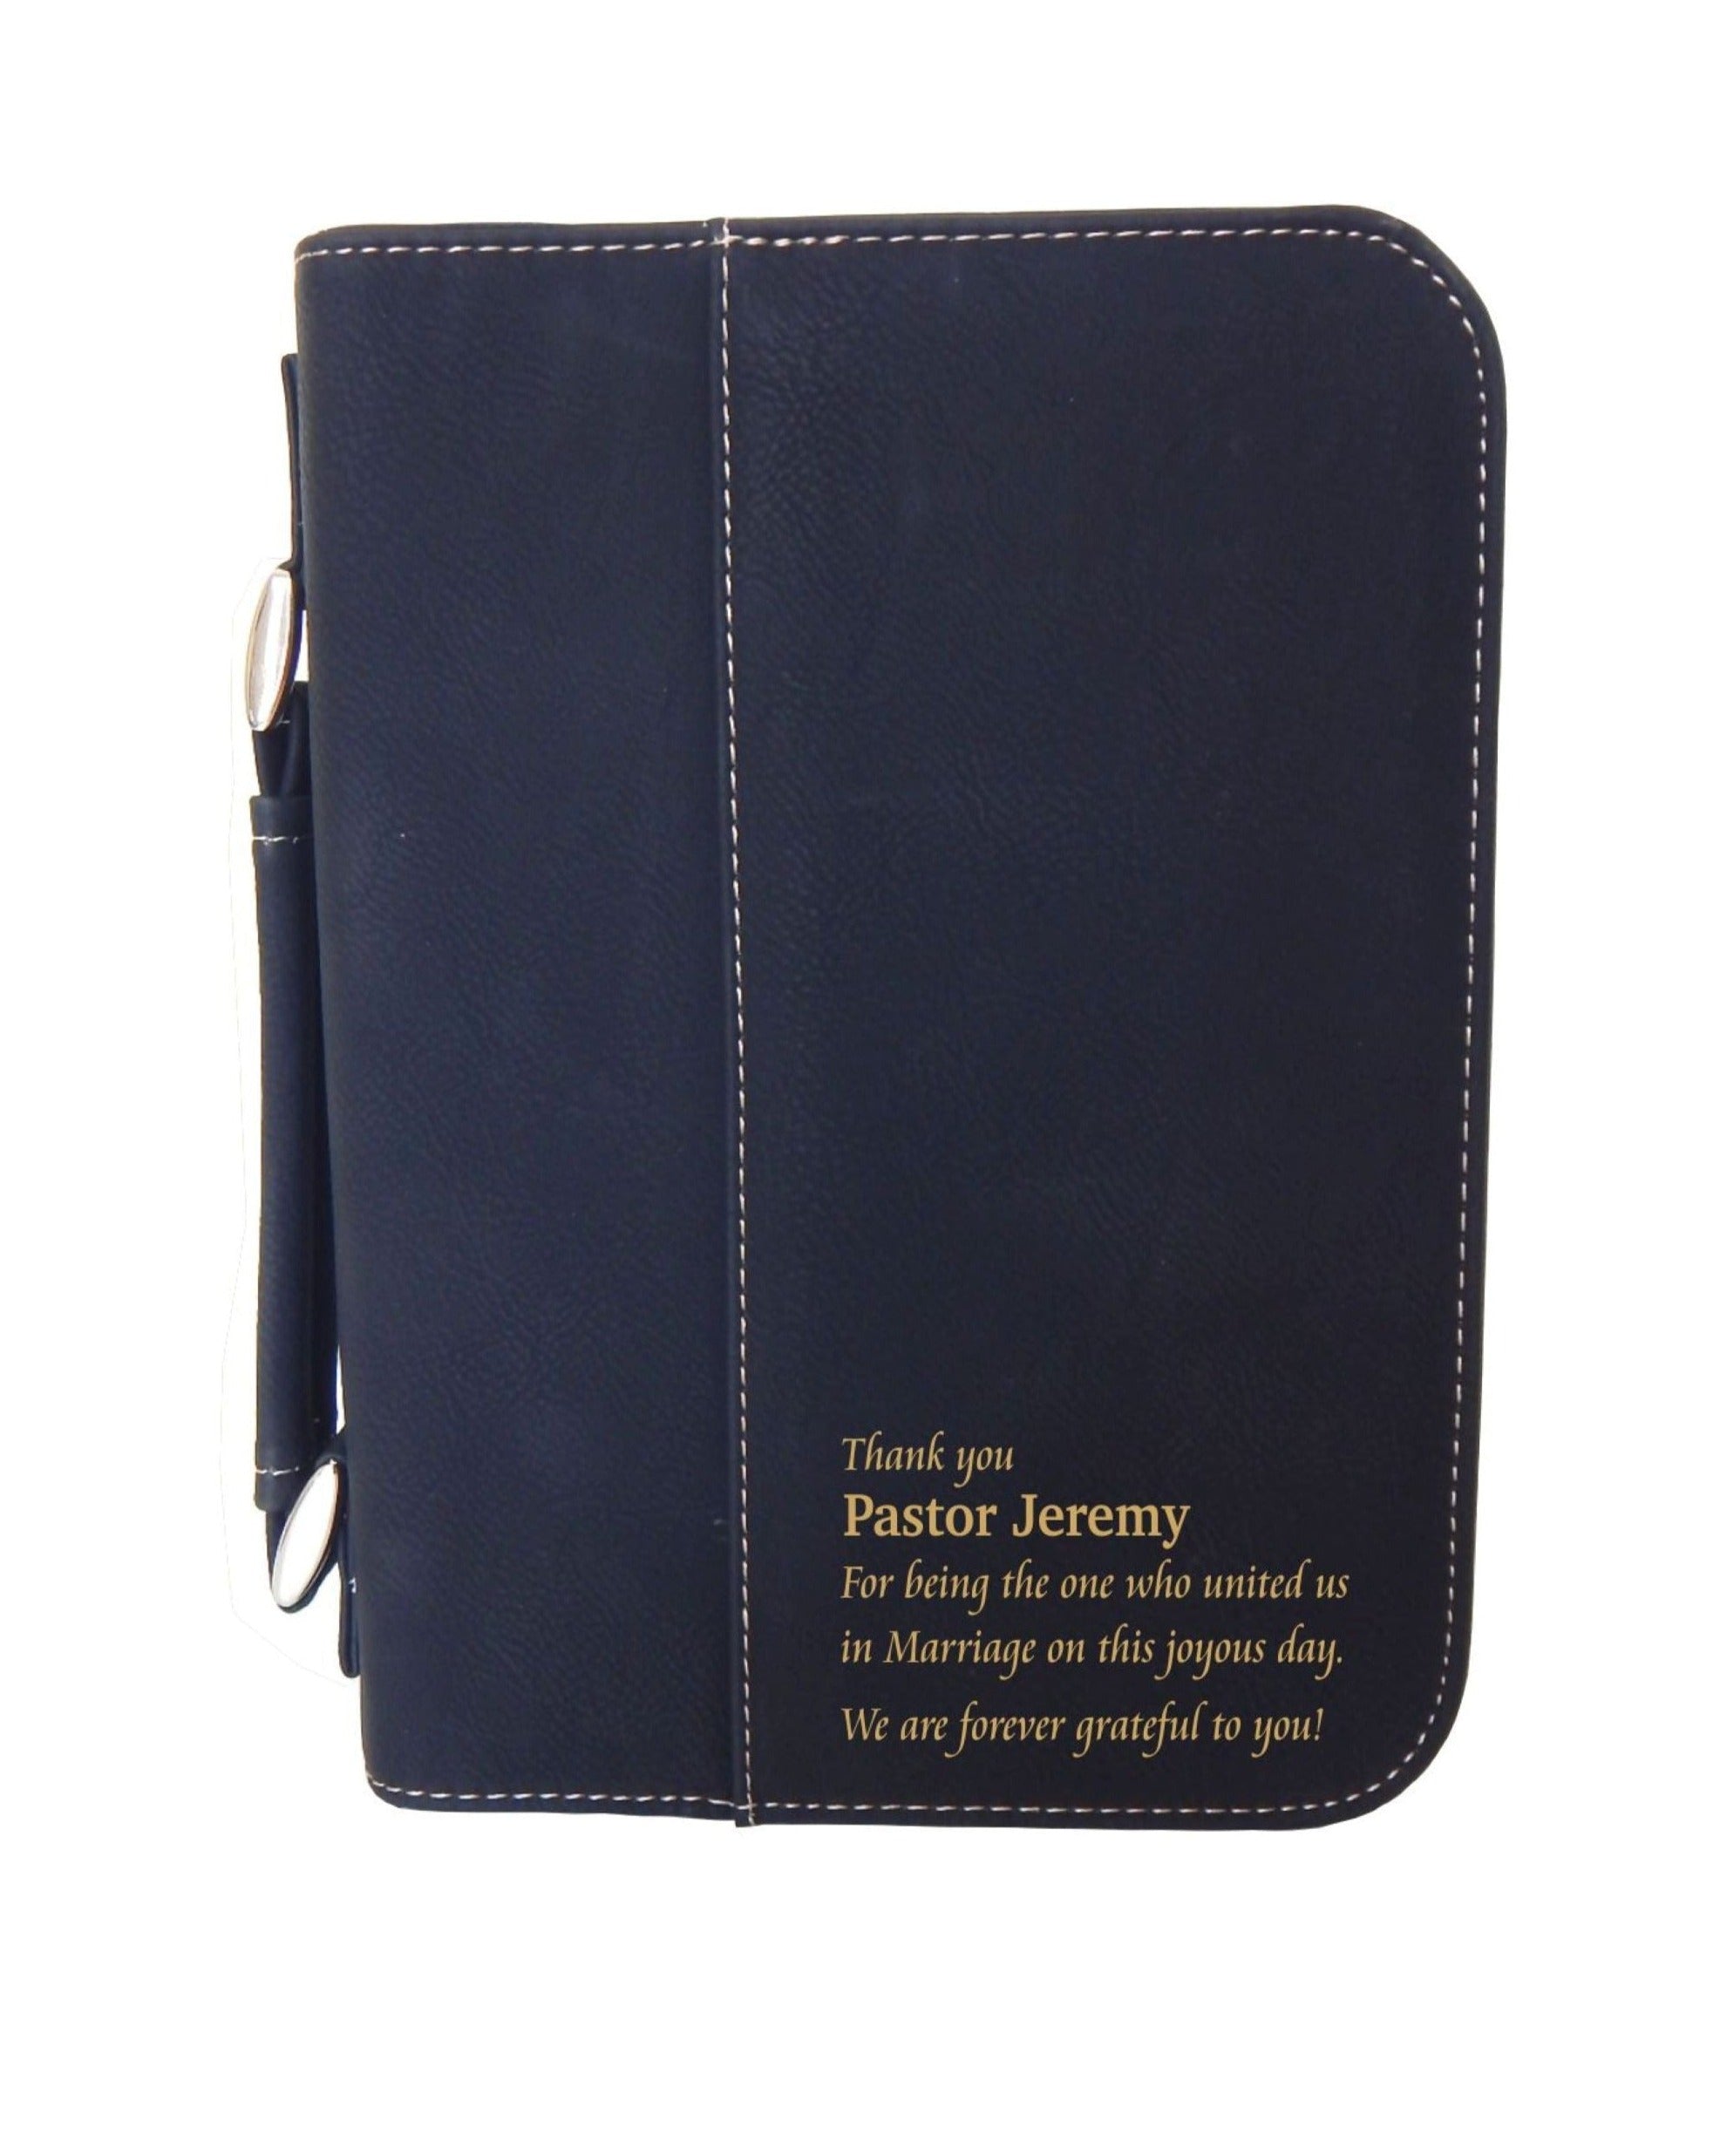 Wedding Officiant Gift | Pastor Thank You Personalized Bible Cover